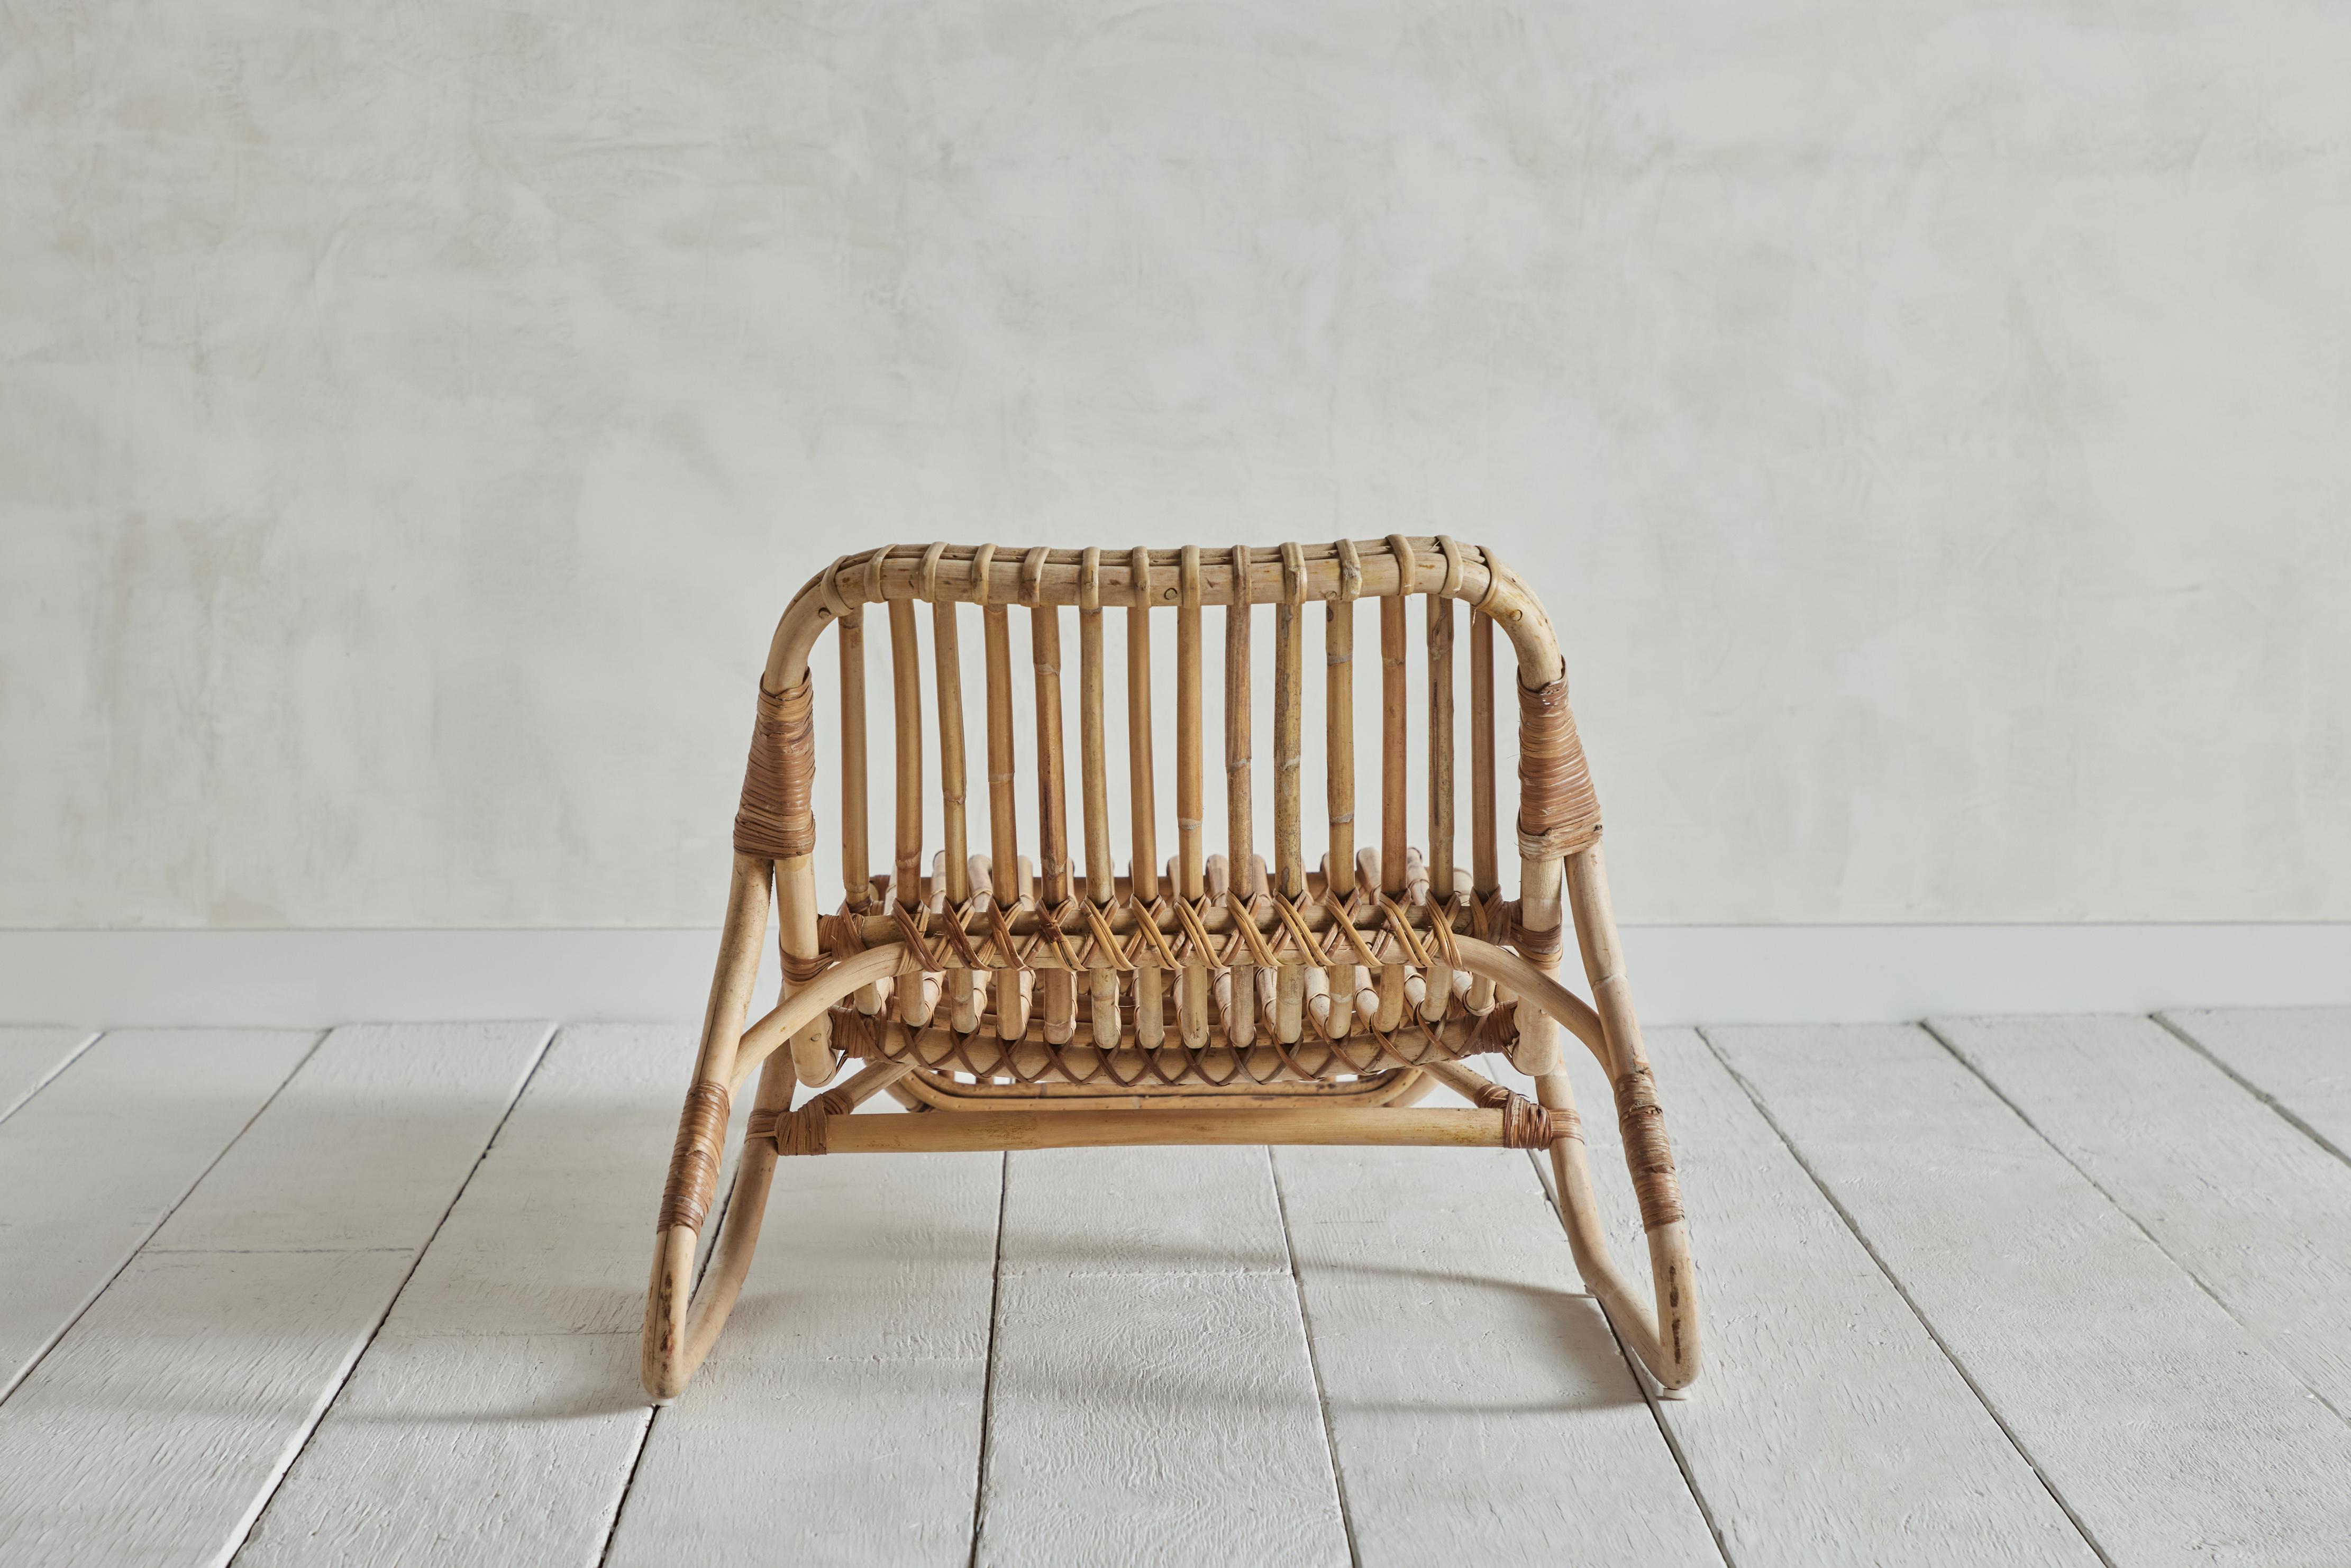 Bamboo Pair of Rattan Chaise Lounges